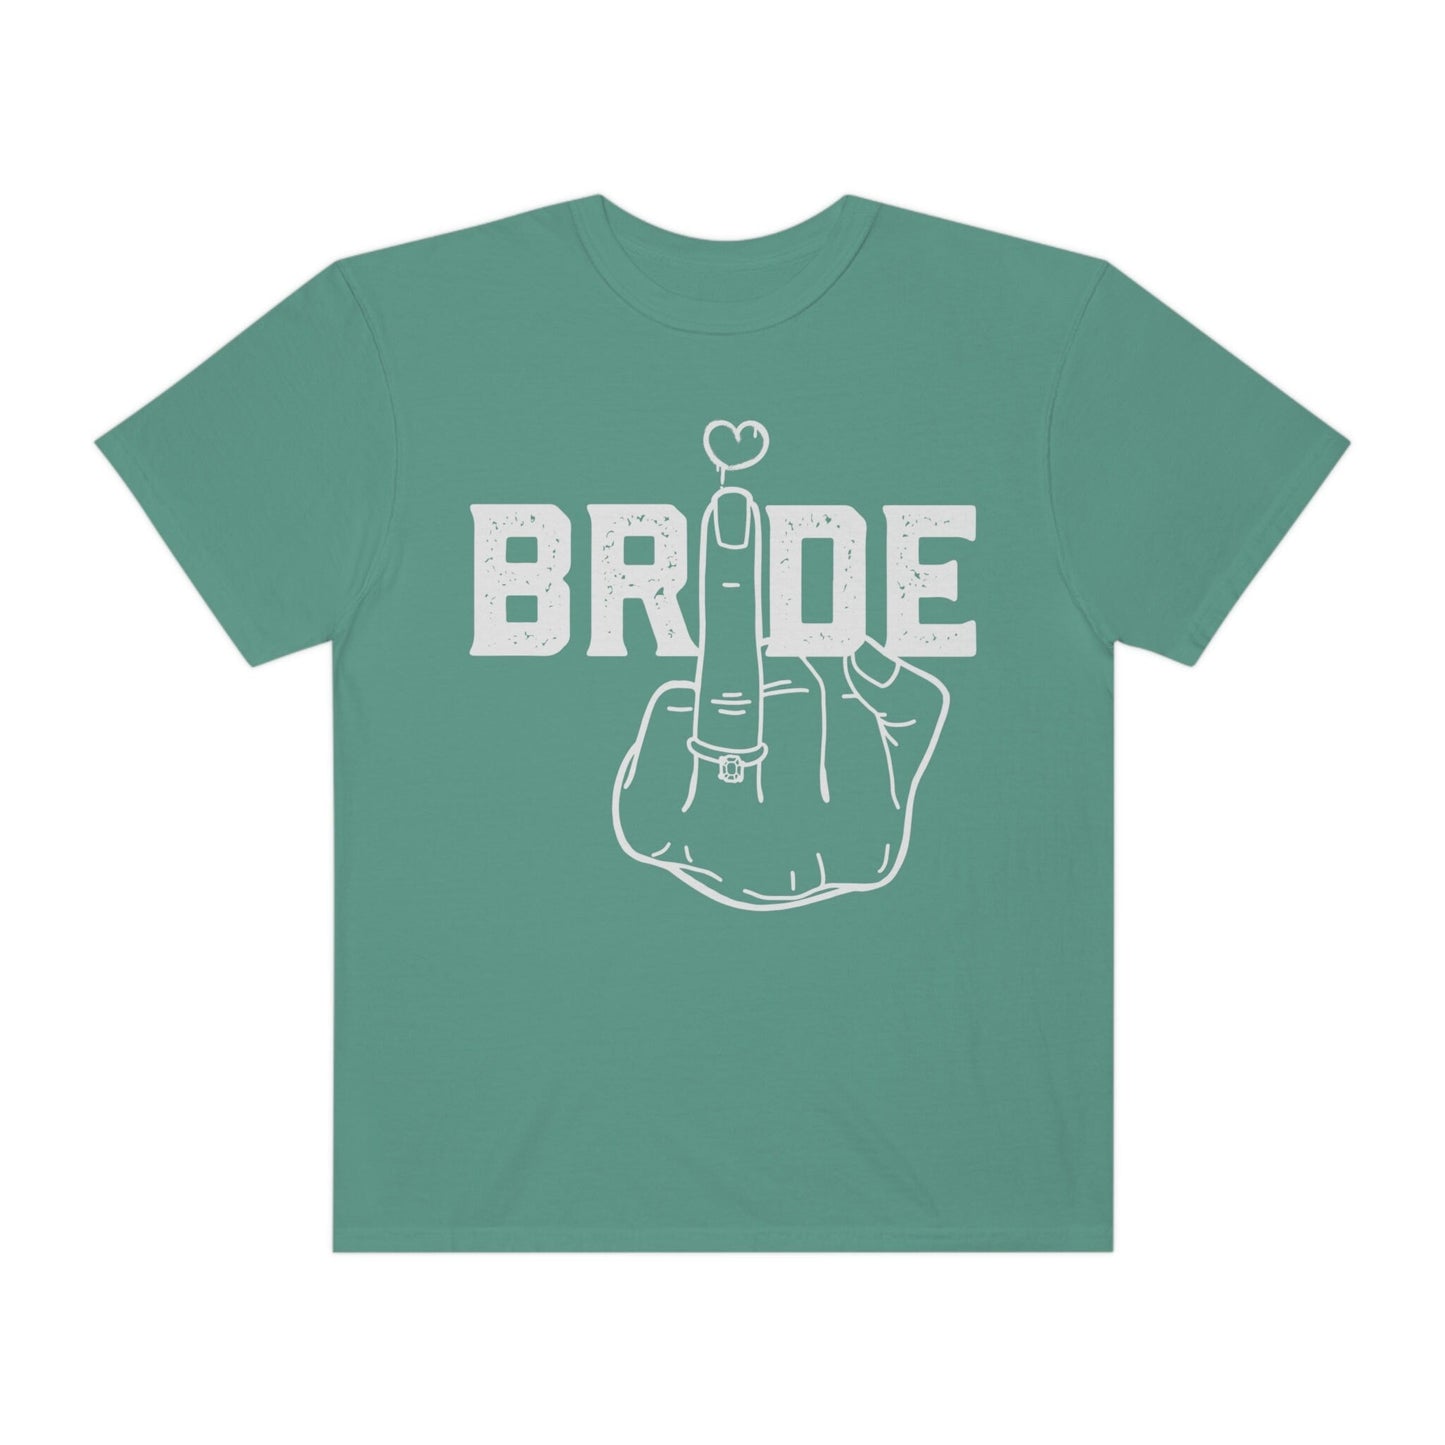 Bride Ring Finger Comfort colors Tshirt, Oversized Fiancee Tee, Cute Wedding Planning Outfit, Honeymoon Apparel Her, Bride Tribe, New Mrs